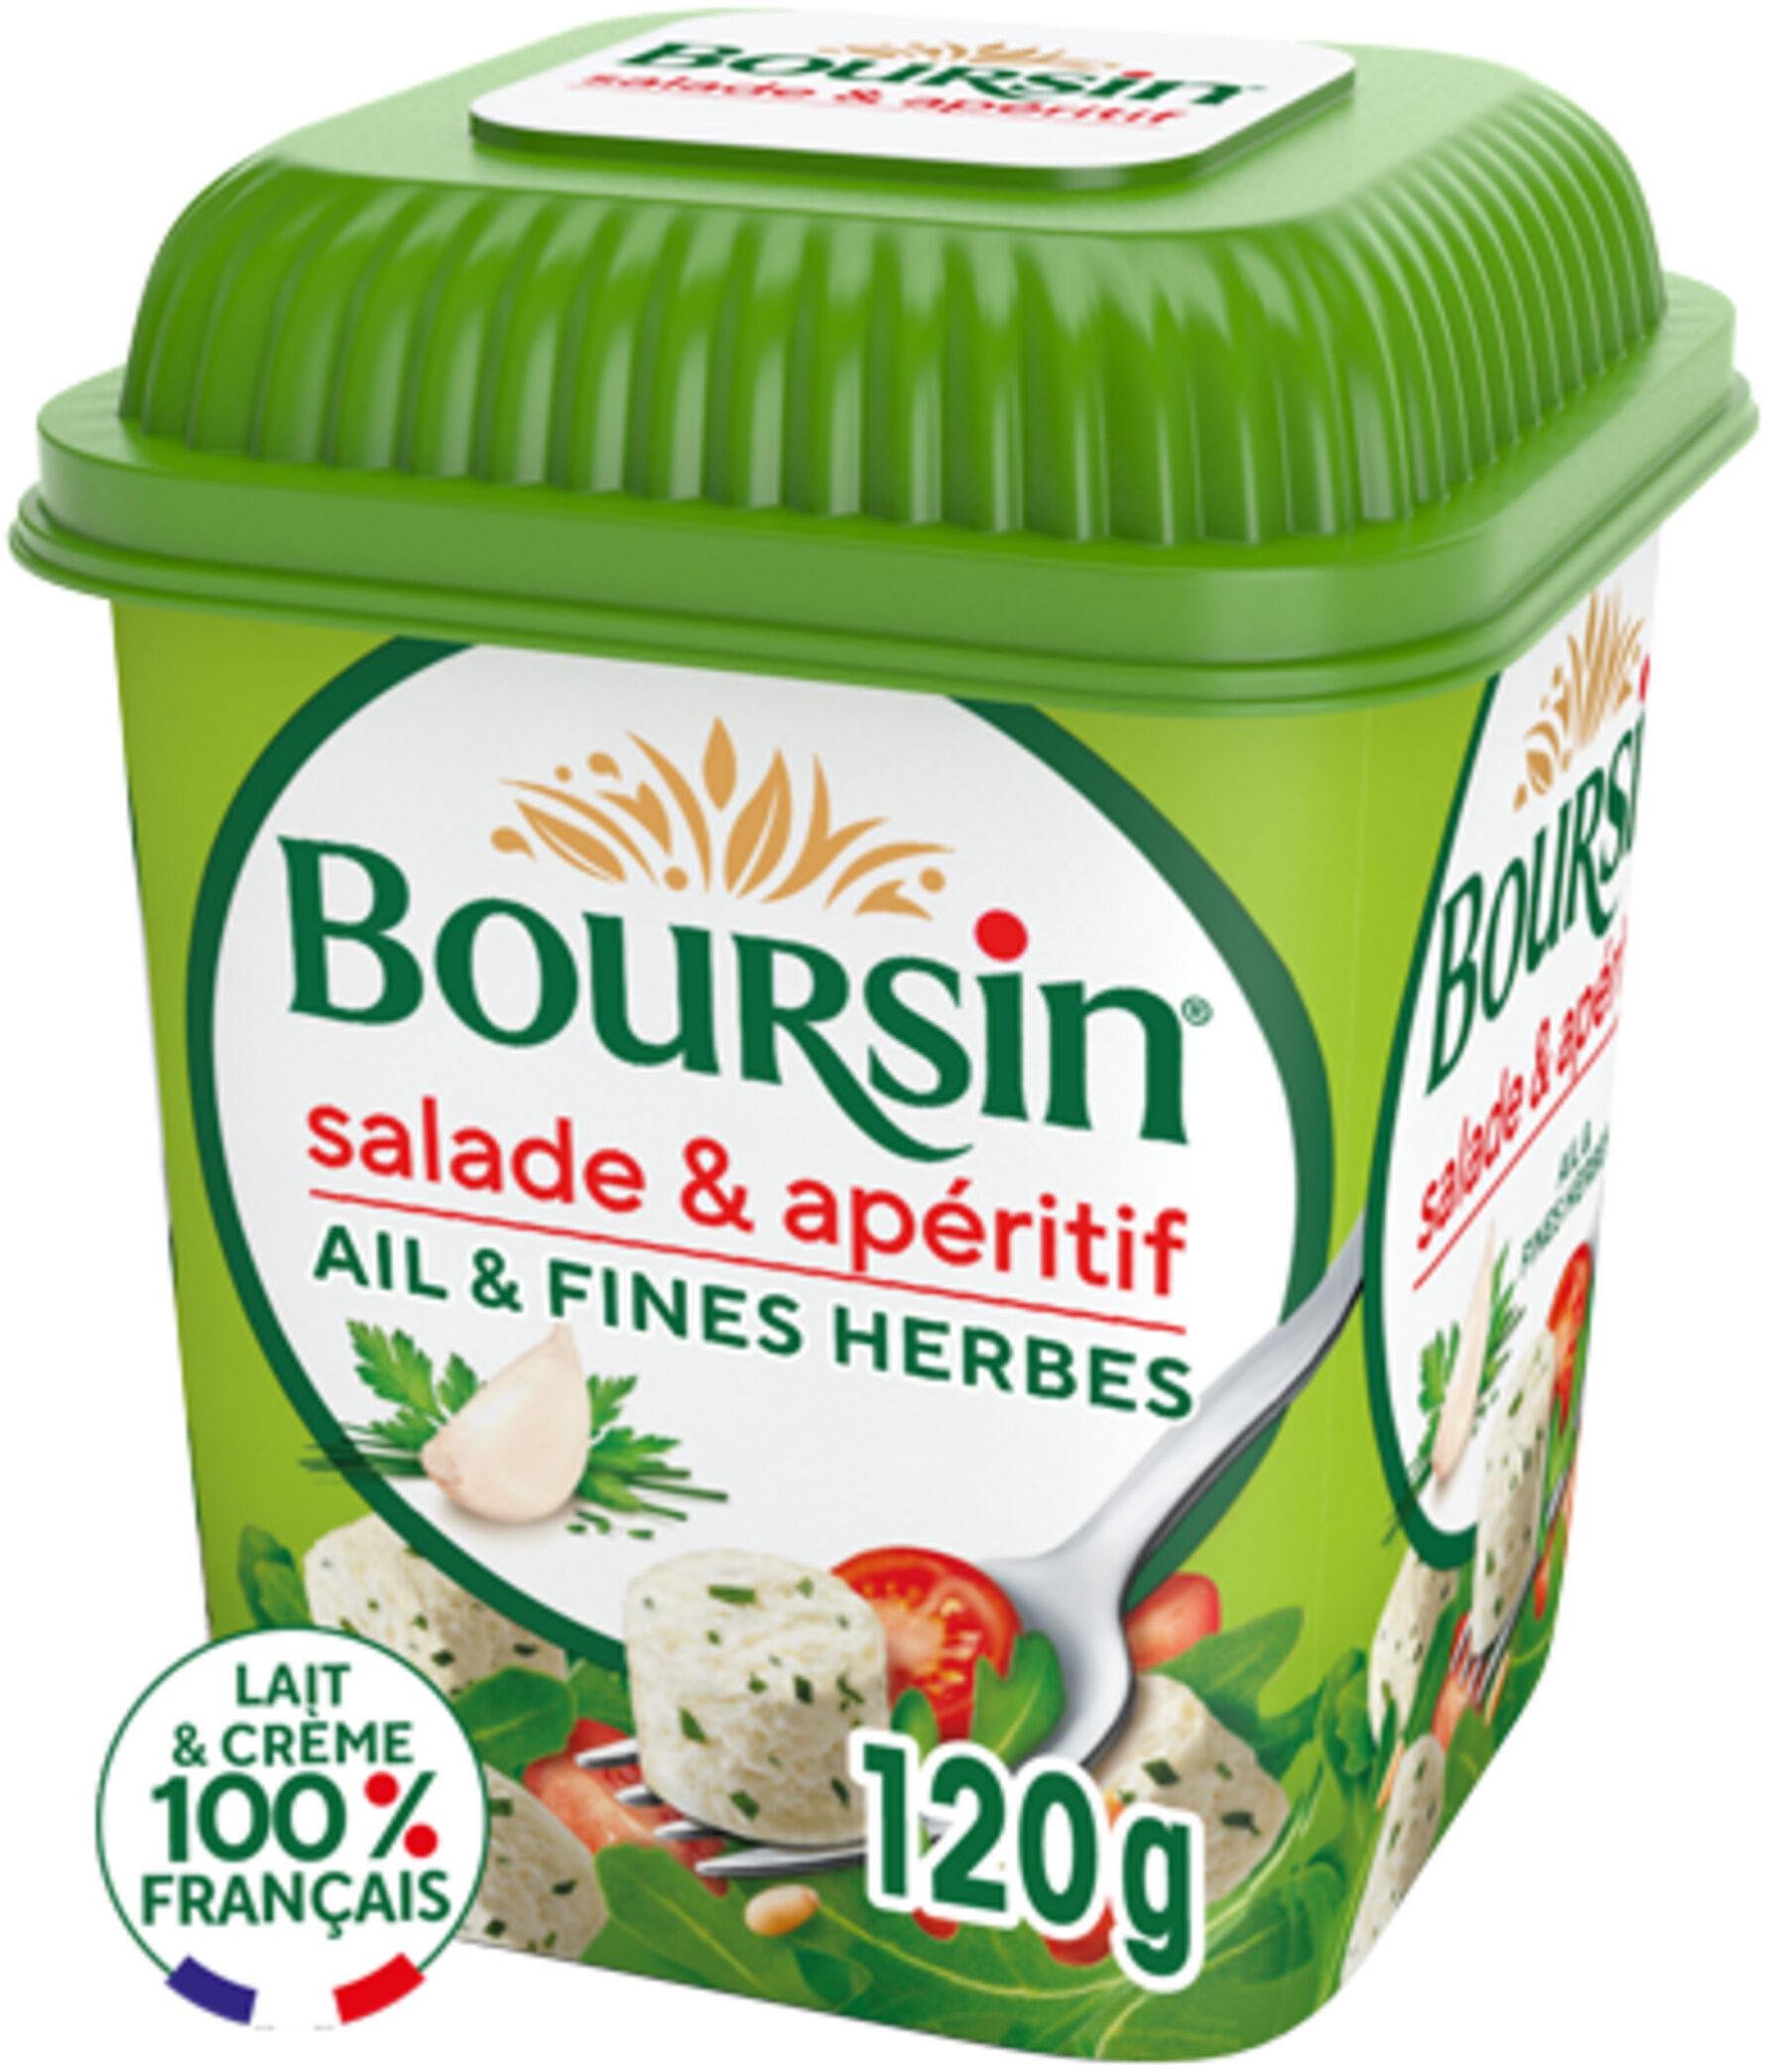 Boursin® Salade Ail & Fines Herbes - Product - fr